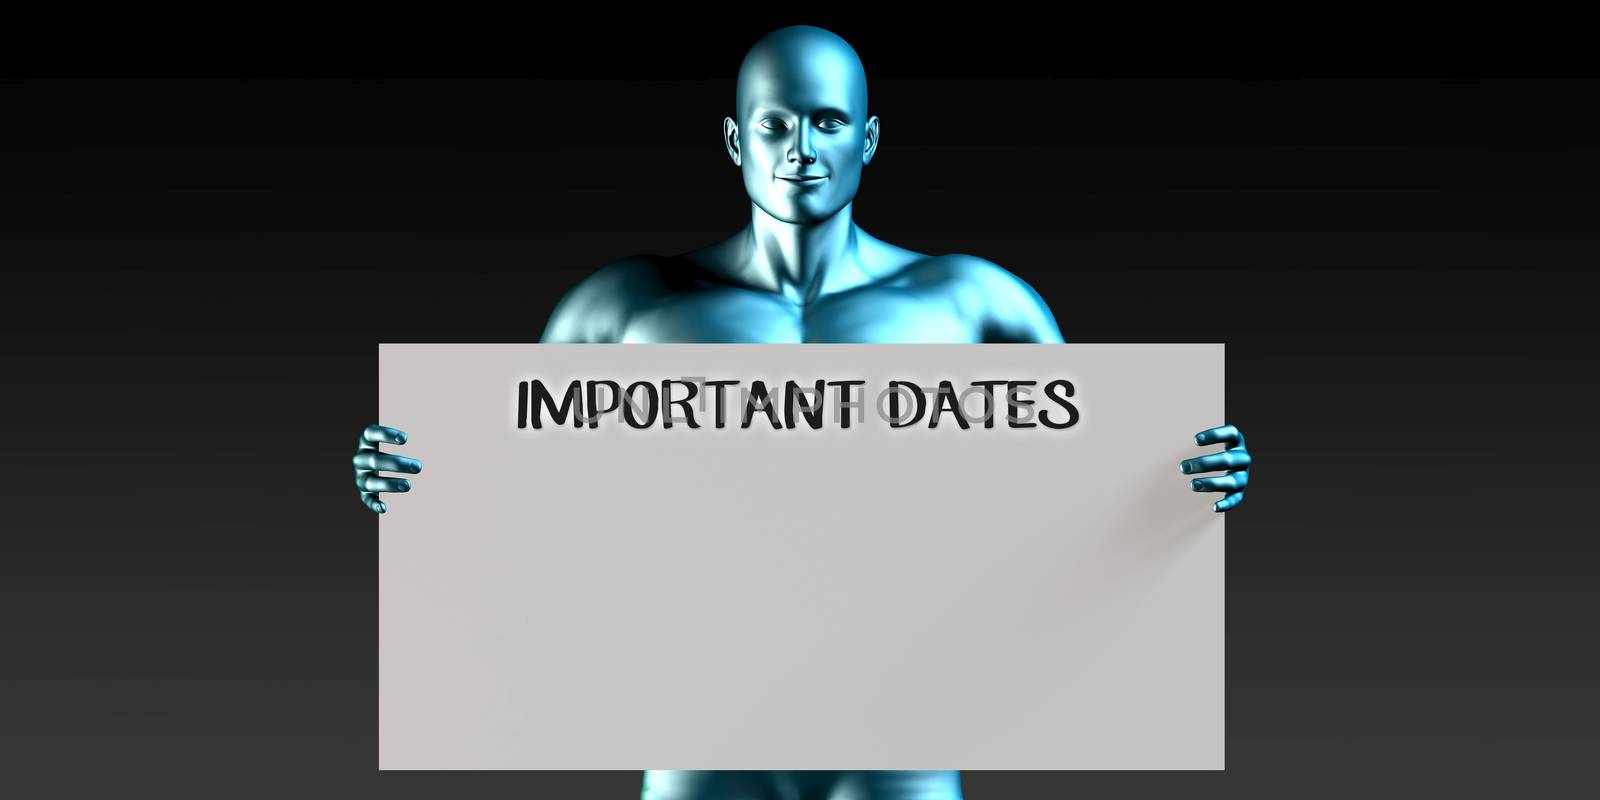 Important Dates by kentoh